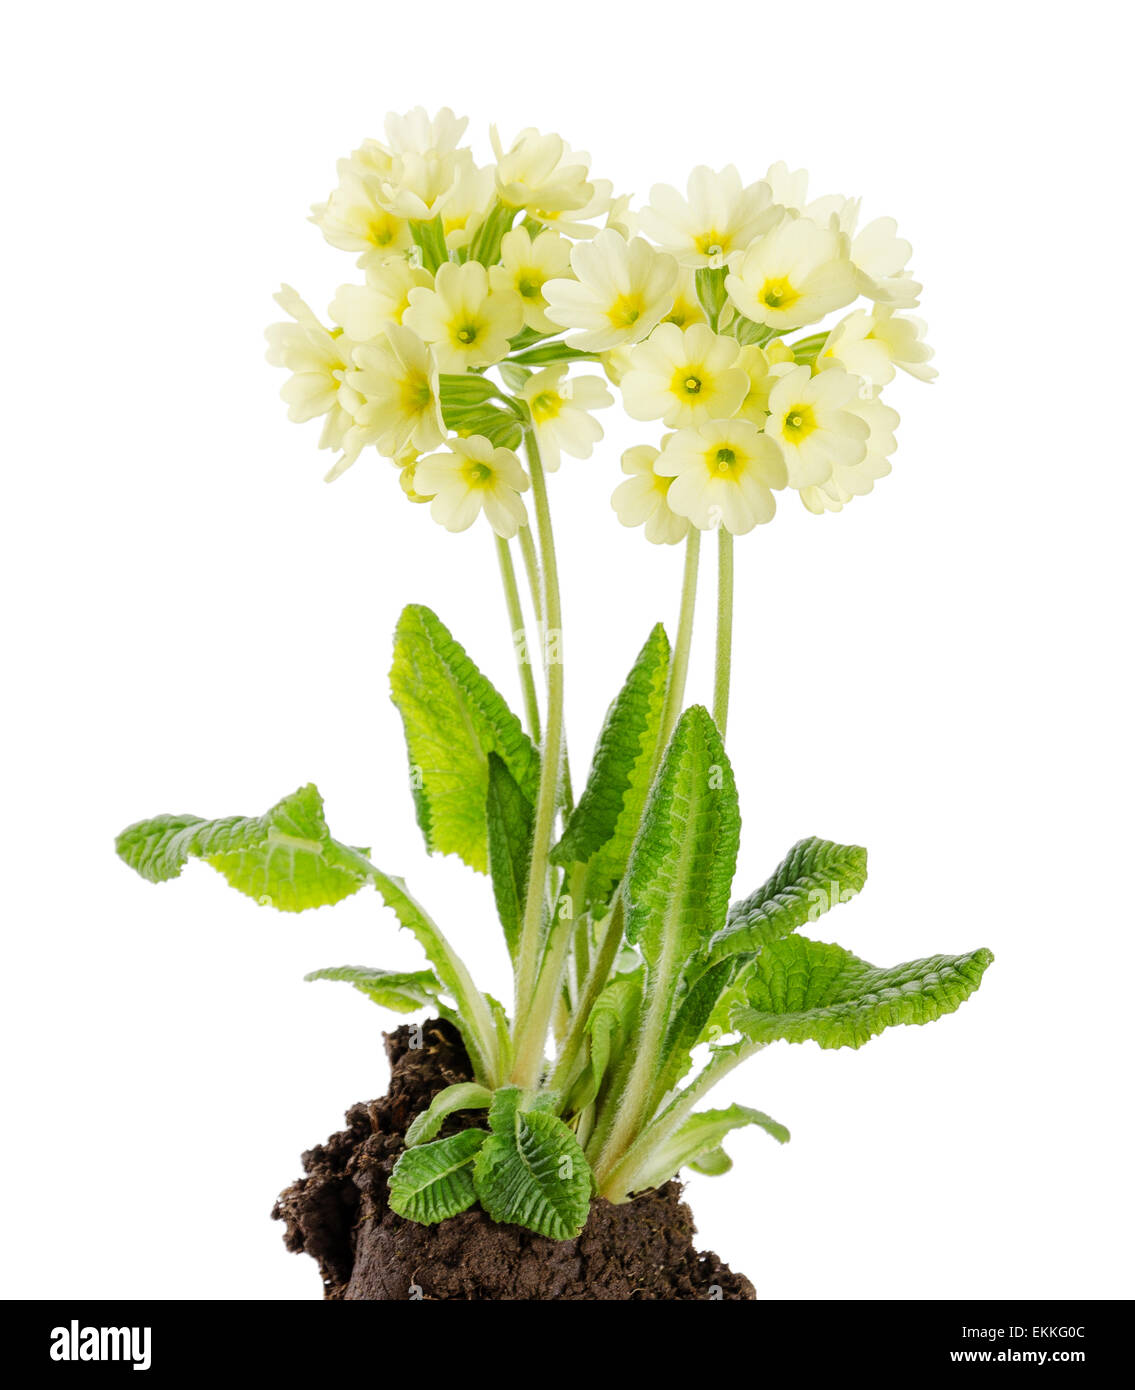 Oxlip, Primula elatior on white background with earth. A species of flowering plant in the family Primulaceae. Stock Photo